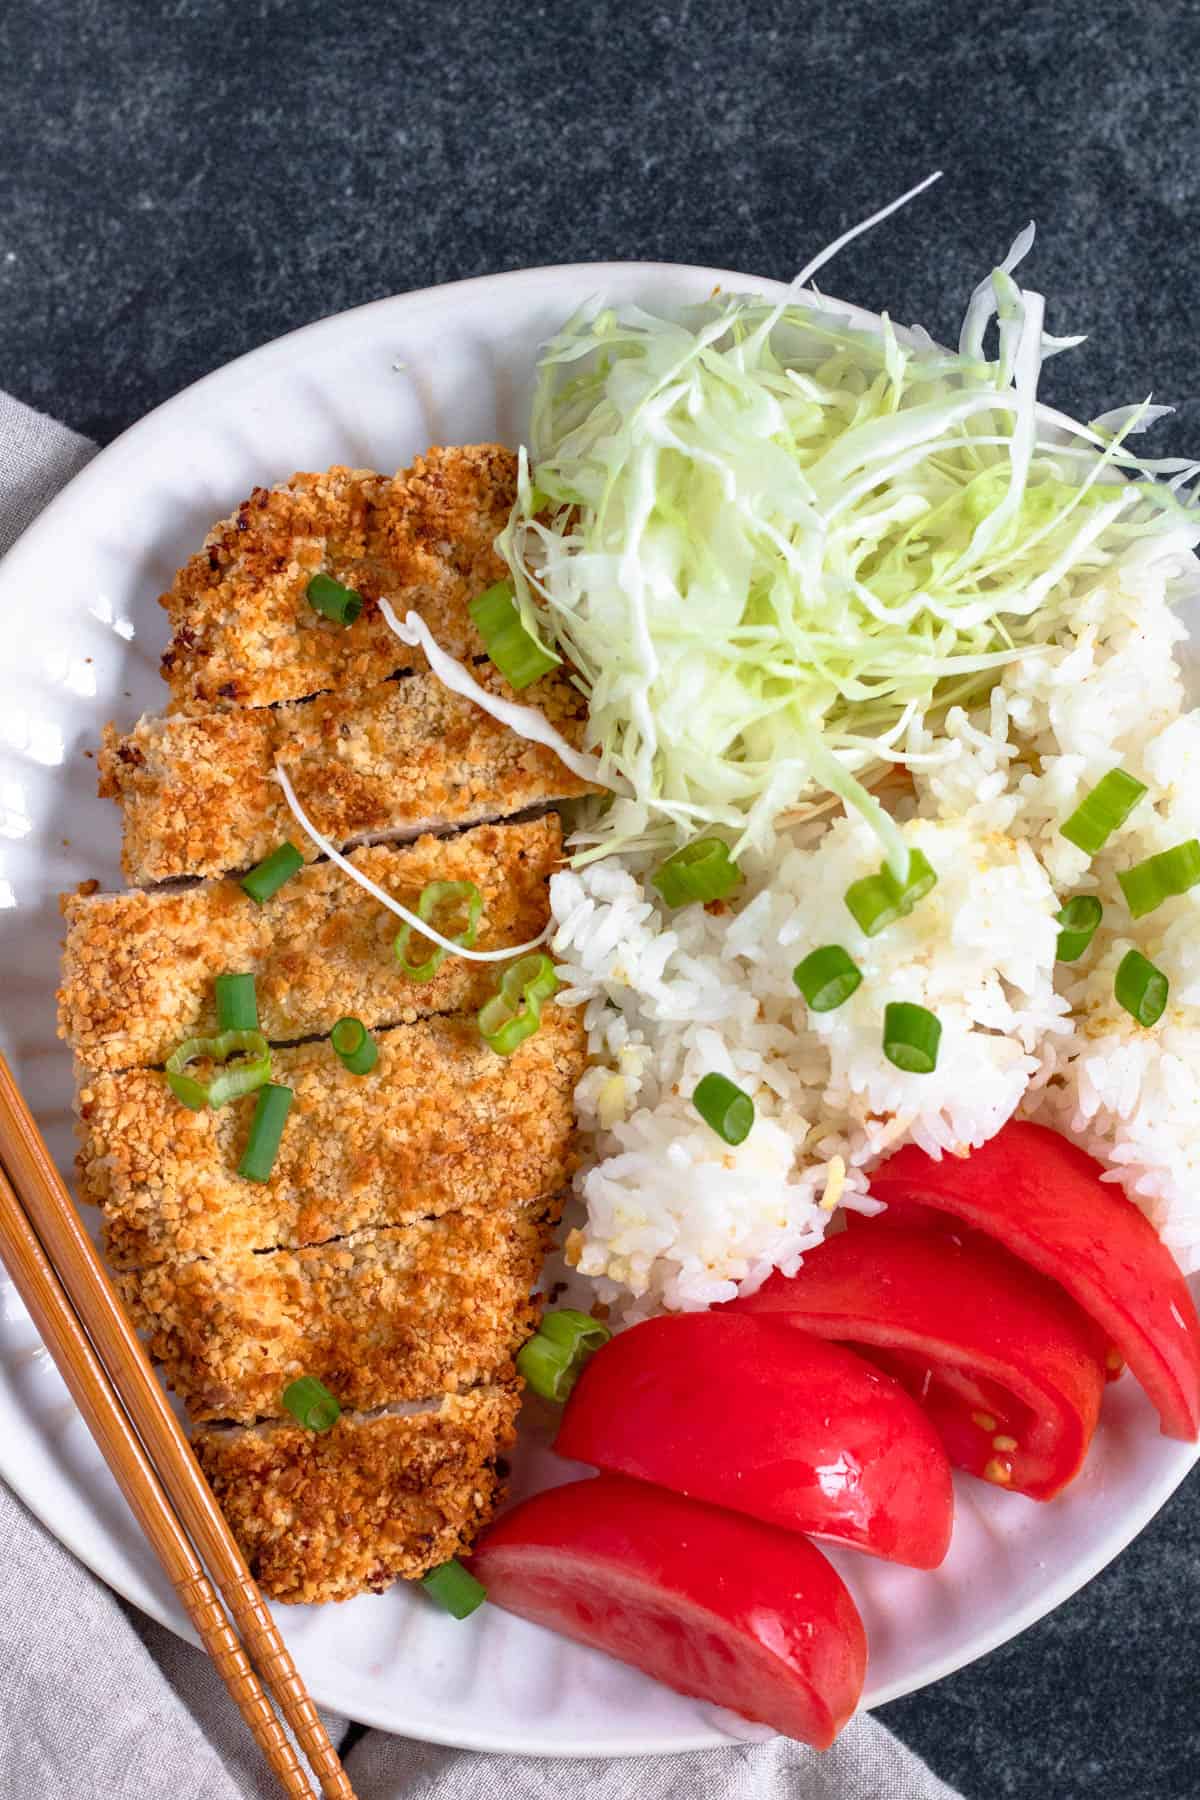 Chicken katsu sliced into thin pieces, served with tomato wedges, white rice and cabbage and garnished with green onions. 